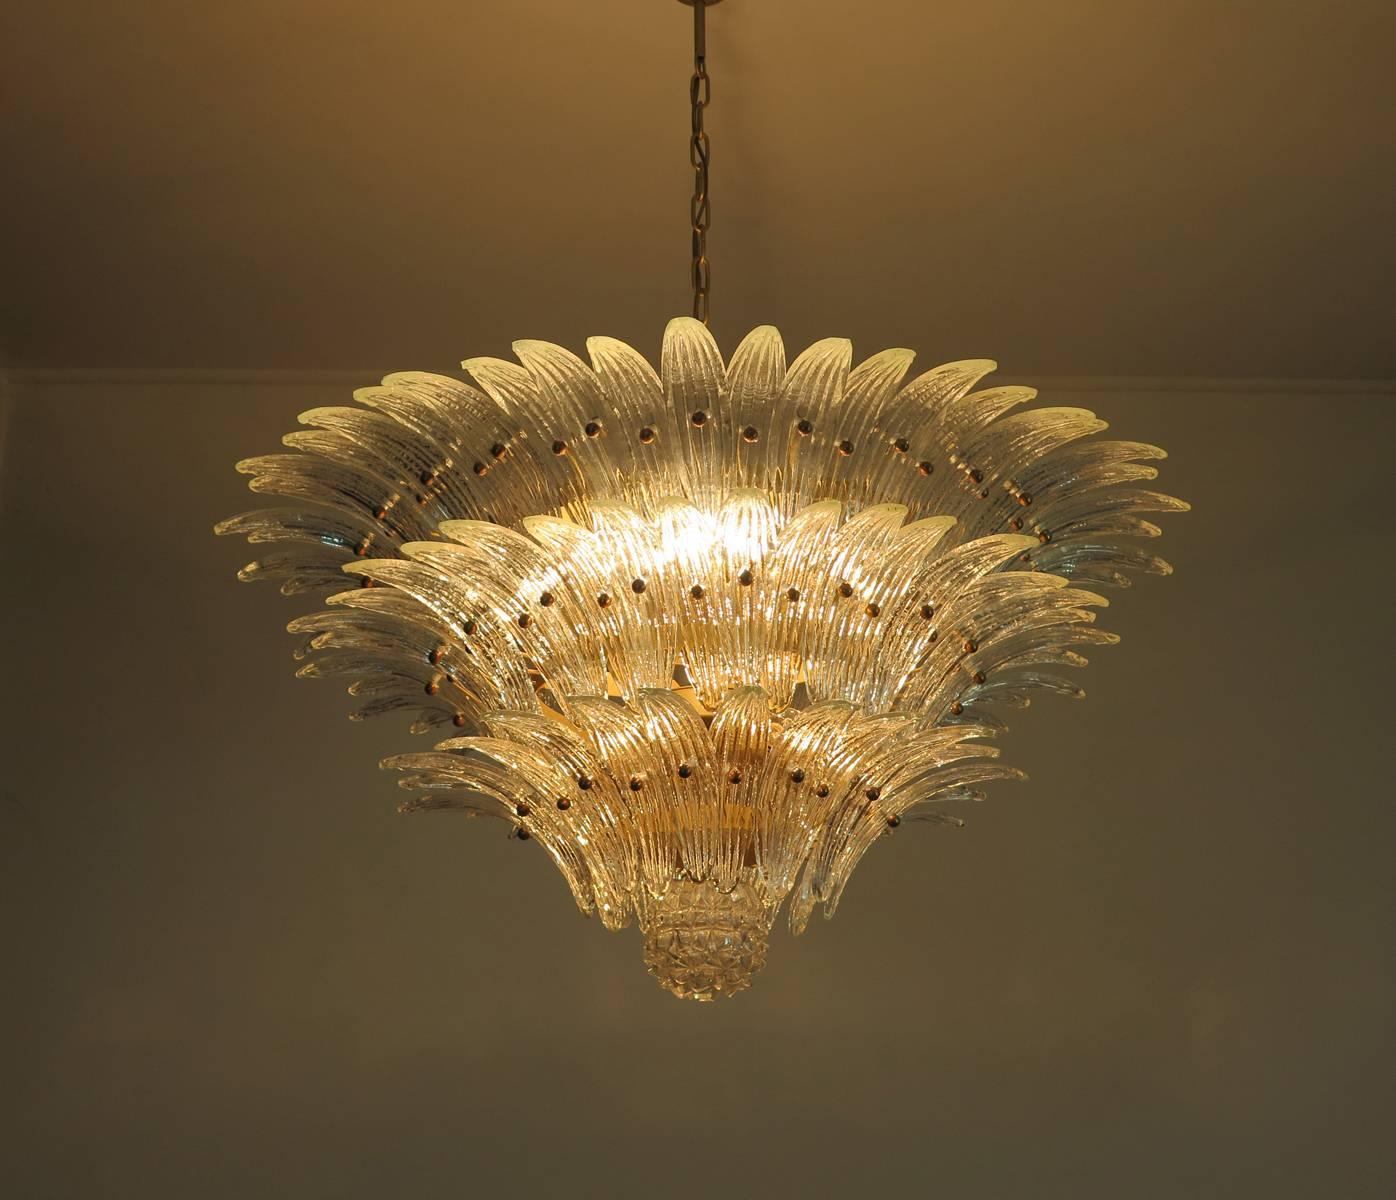 Palmette ceiling light made by 104 Murano transparent glasses in a gold metal frame. Murano blown glass in a traditional way. Structure in gold colored metal.
Period: 1980s
Dimensions: 47.25 inches (120 cm) height with chain; 25.60 inches (65 cm)